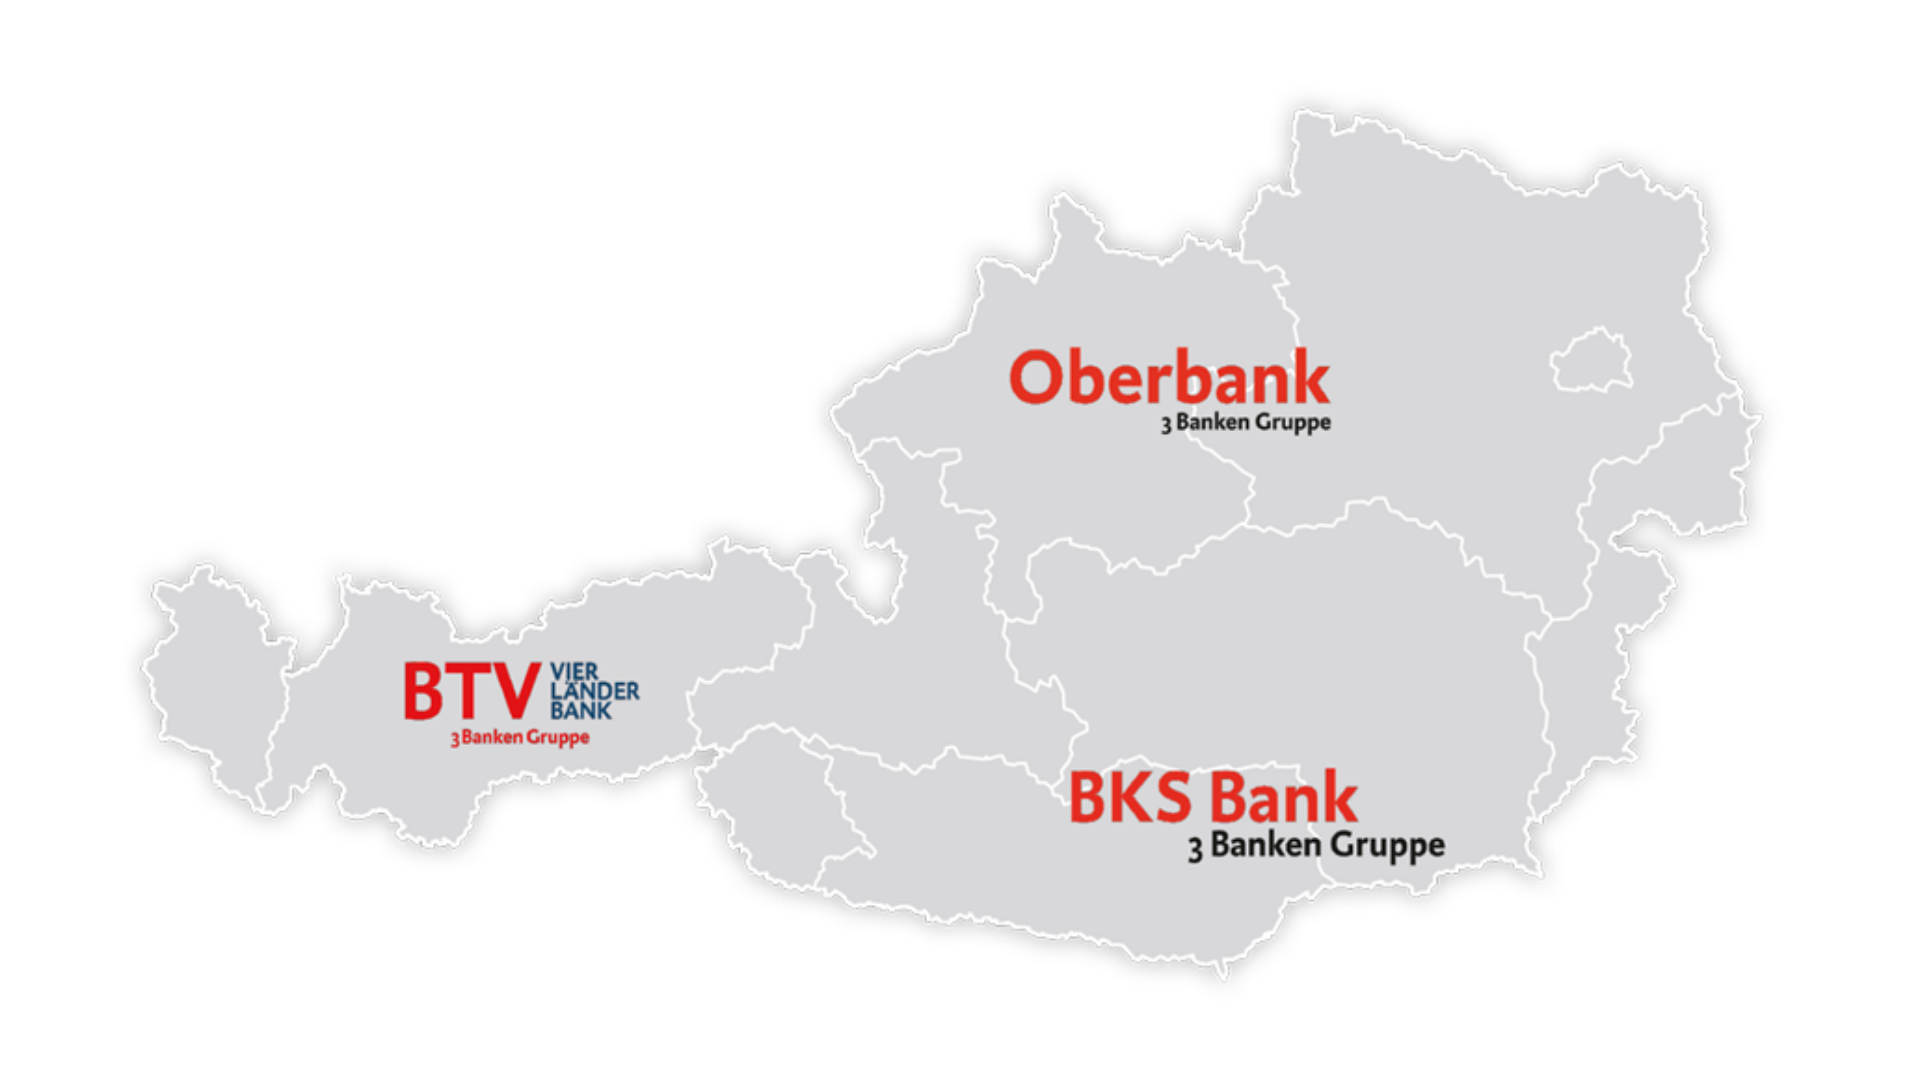 Map of Austria showing the market areas of the 3 Banken Group